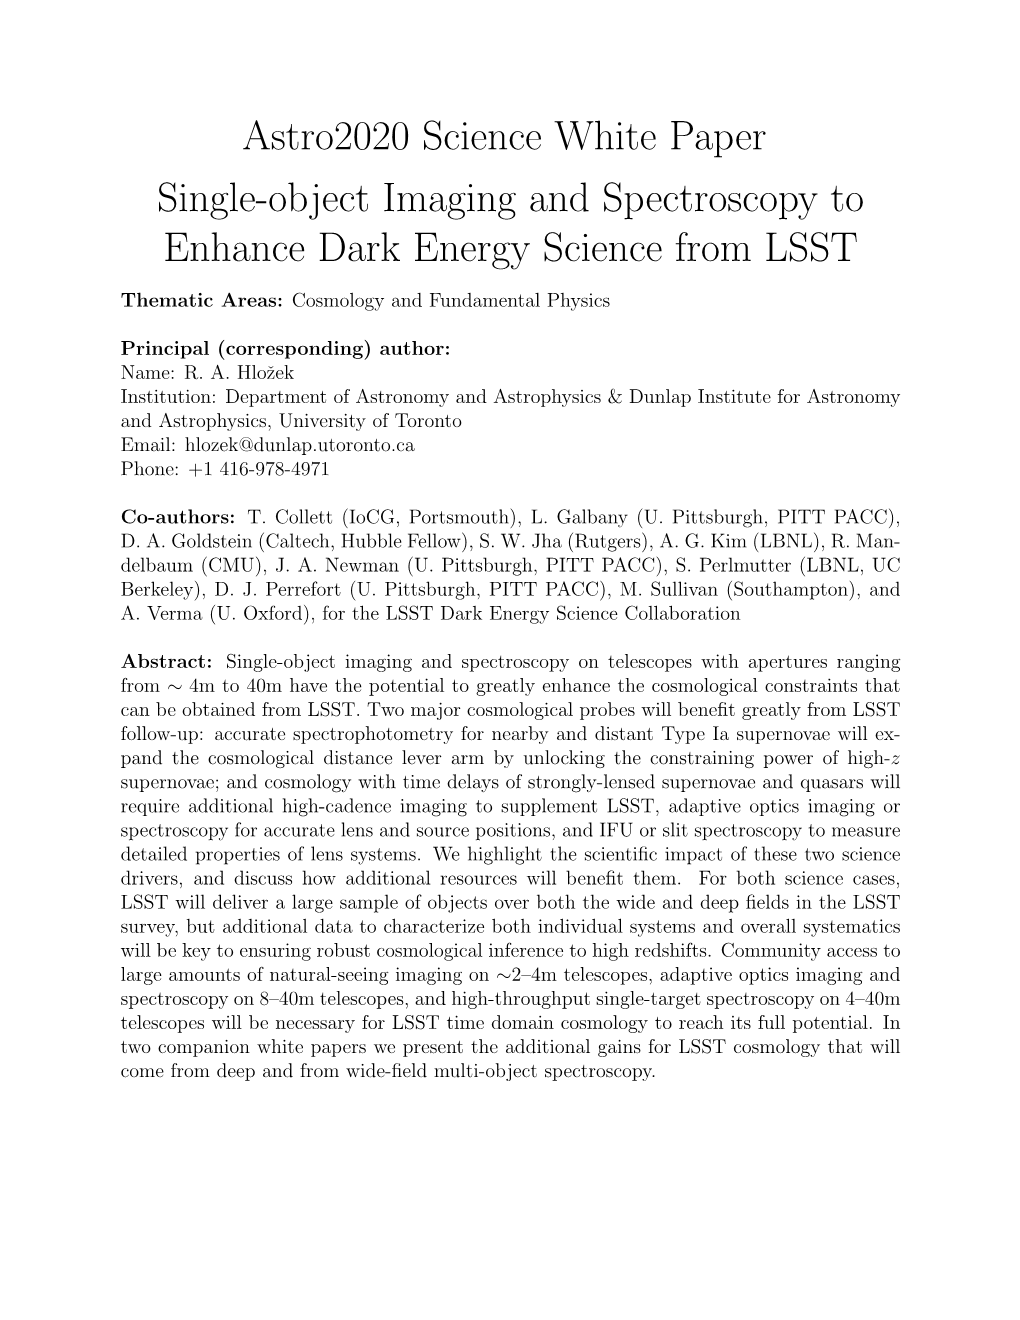 Astro2020 Science White Paper Single-Object Imaging and Spectroscopy to Enhance Dark Energy Science from LSST